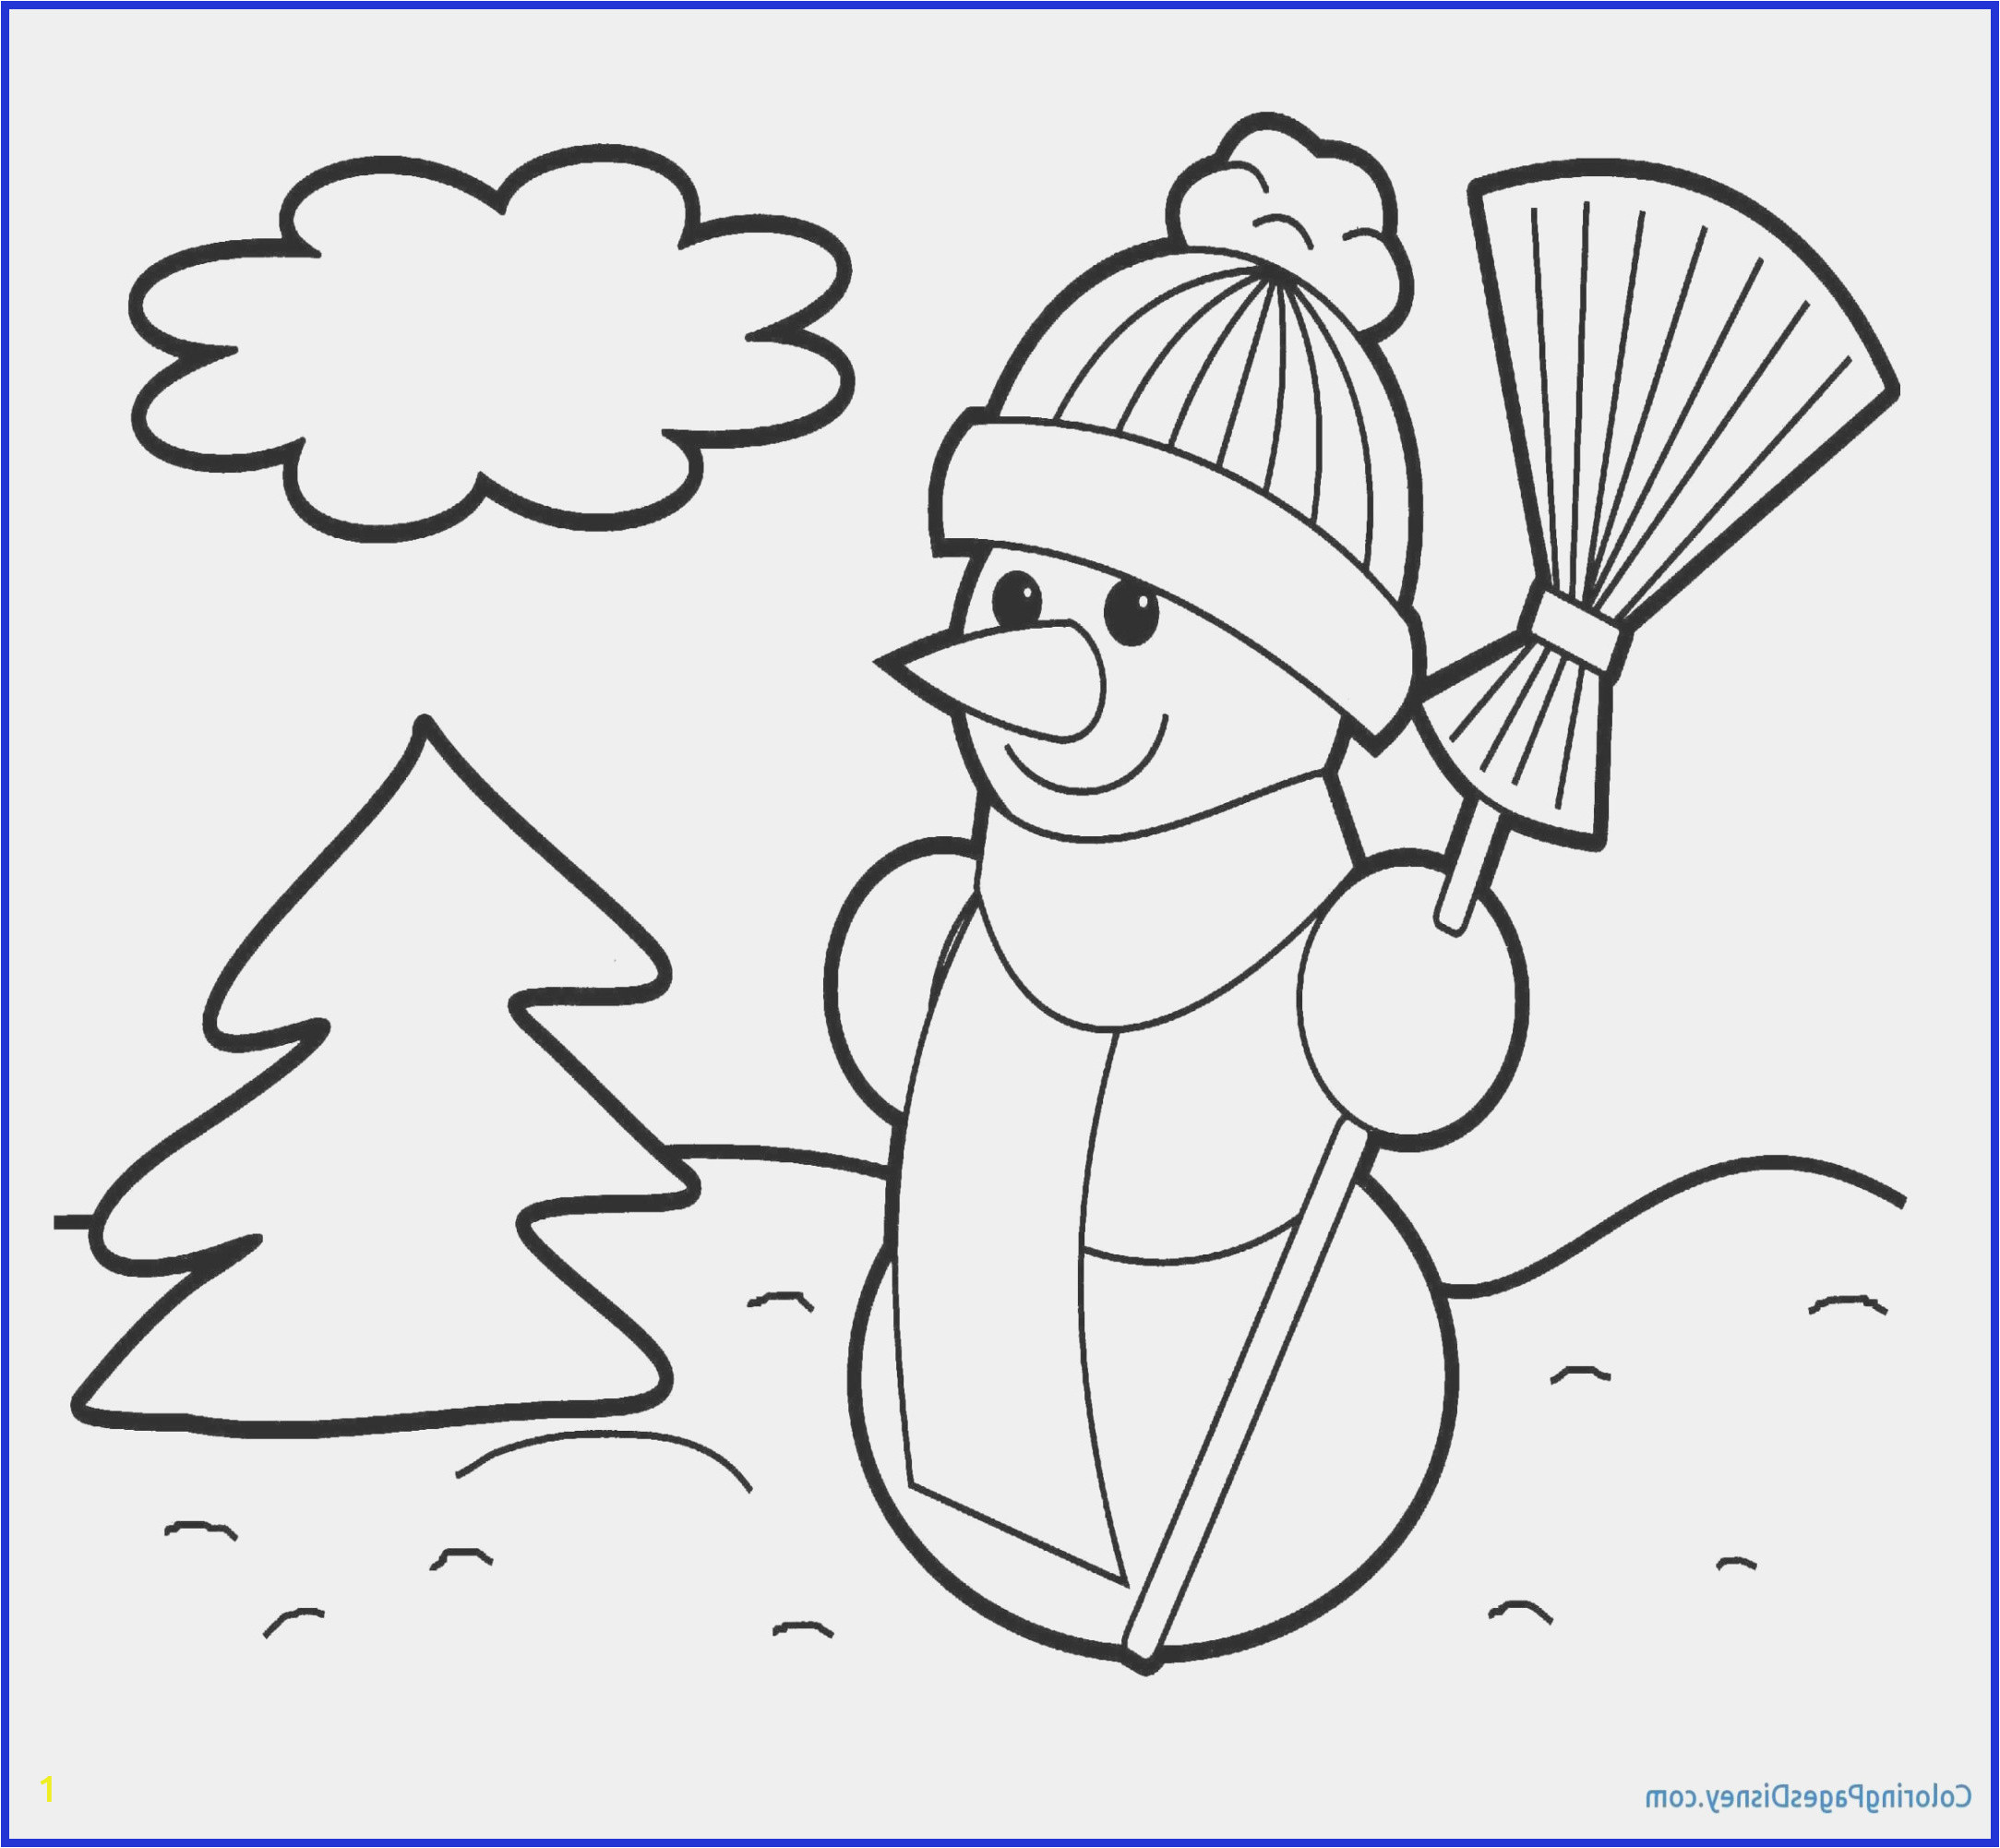 Disney Cartoon Coloring Pages 24 Best S Caterpillars Coloring Page